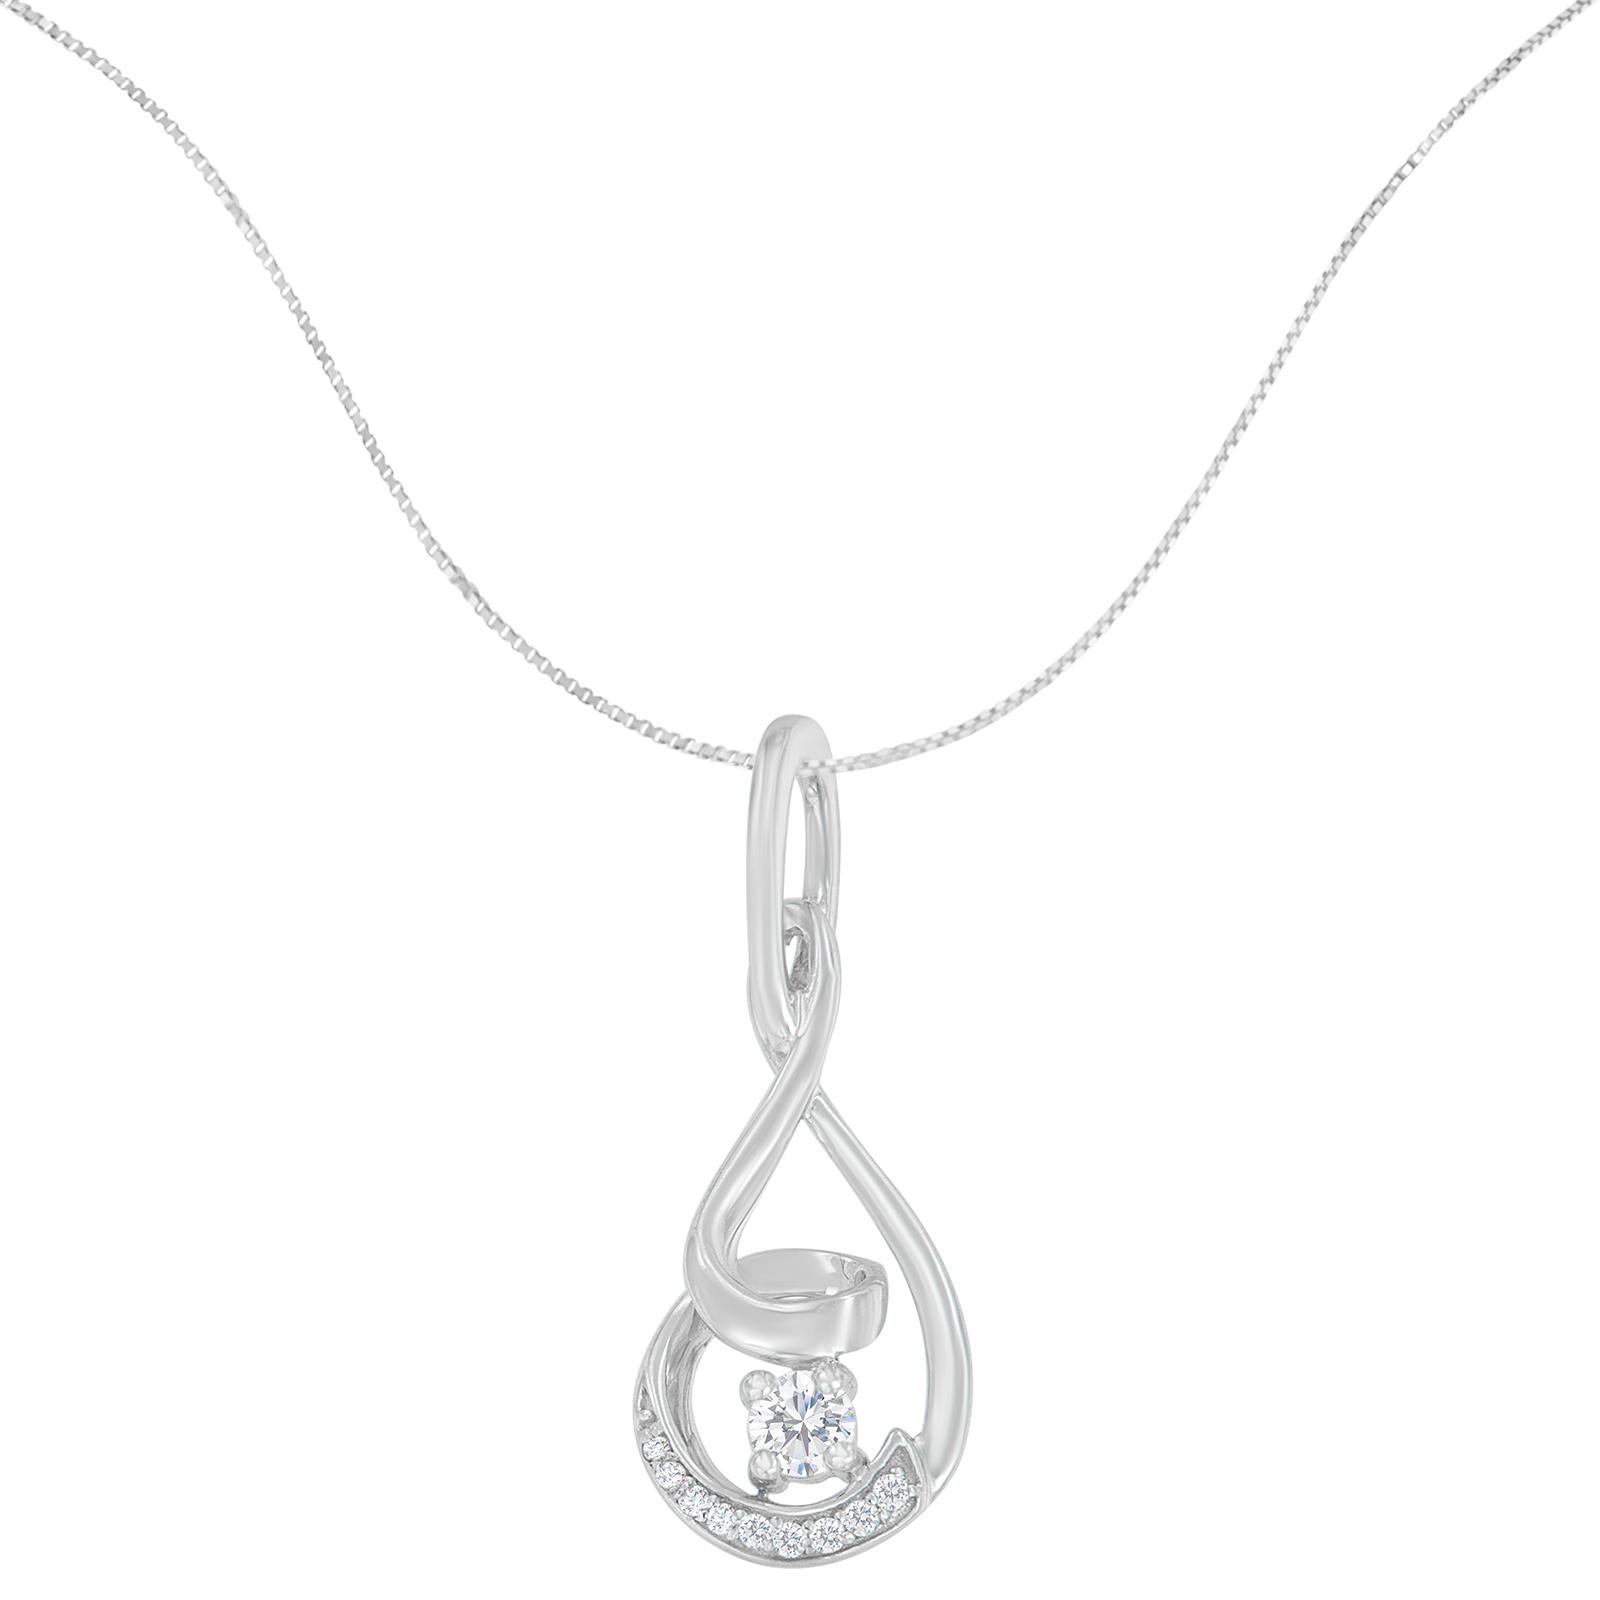 Swirls of white gold are linked together, creating an eye-catching contrast for this unique pendant necklace. A sprinkling of diamonds line the outer layer, while a single stone adorns the center, lending style and elegance. This beautiful necklace